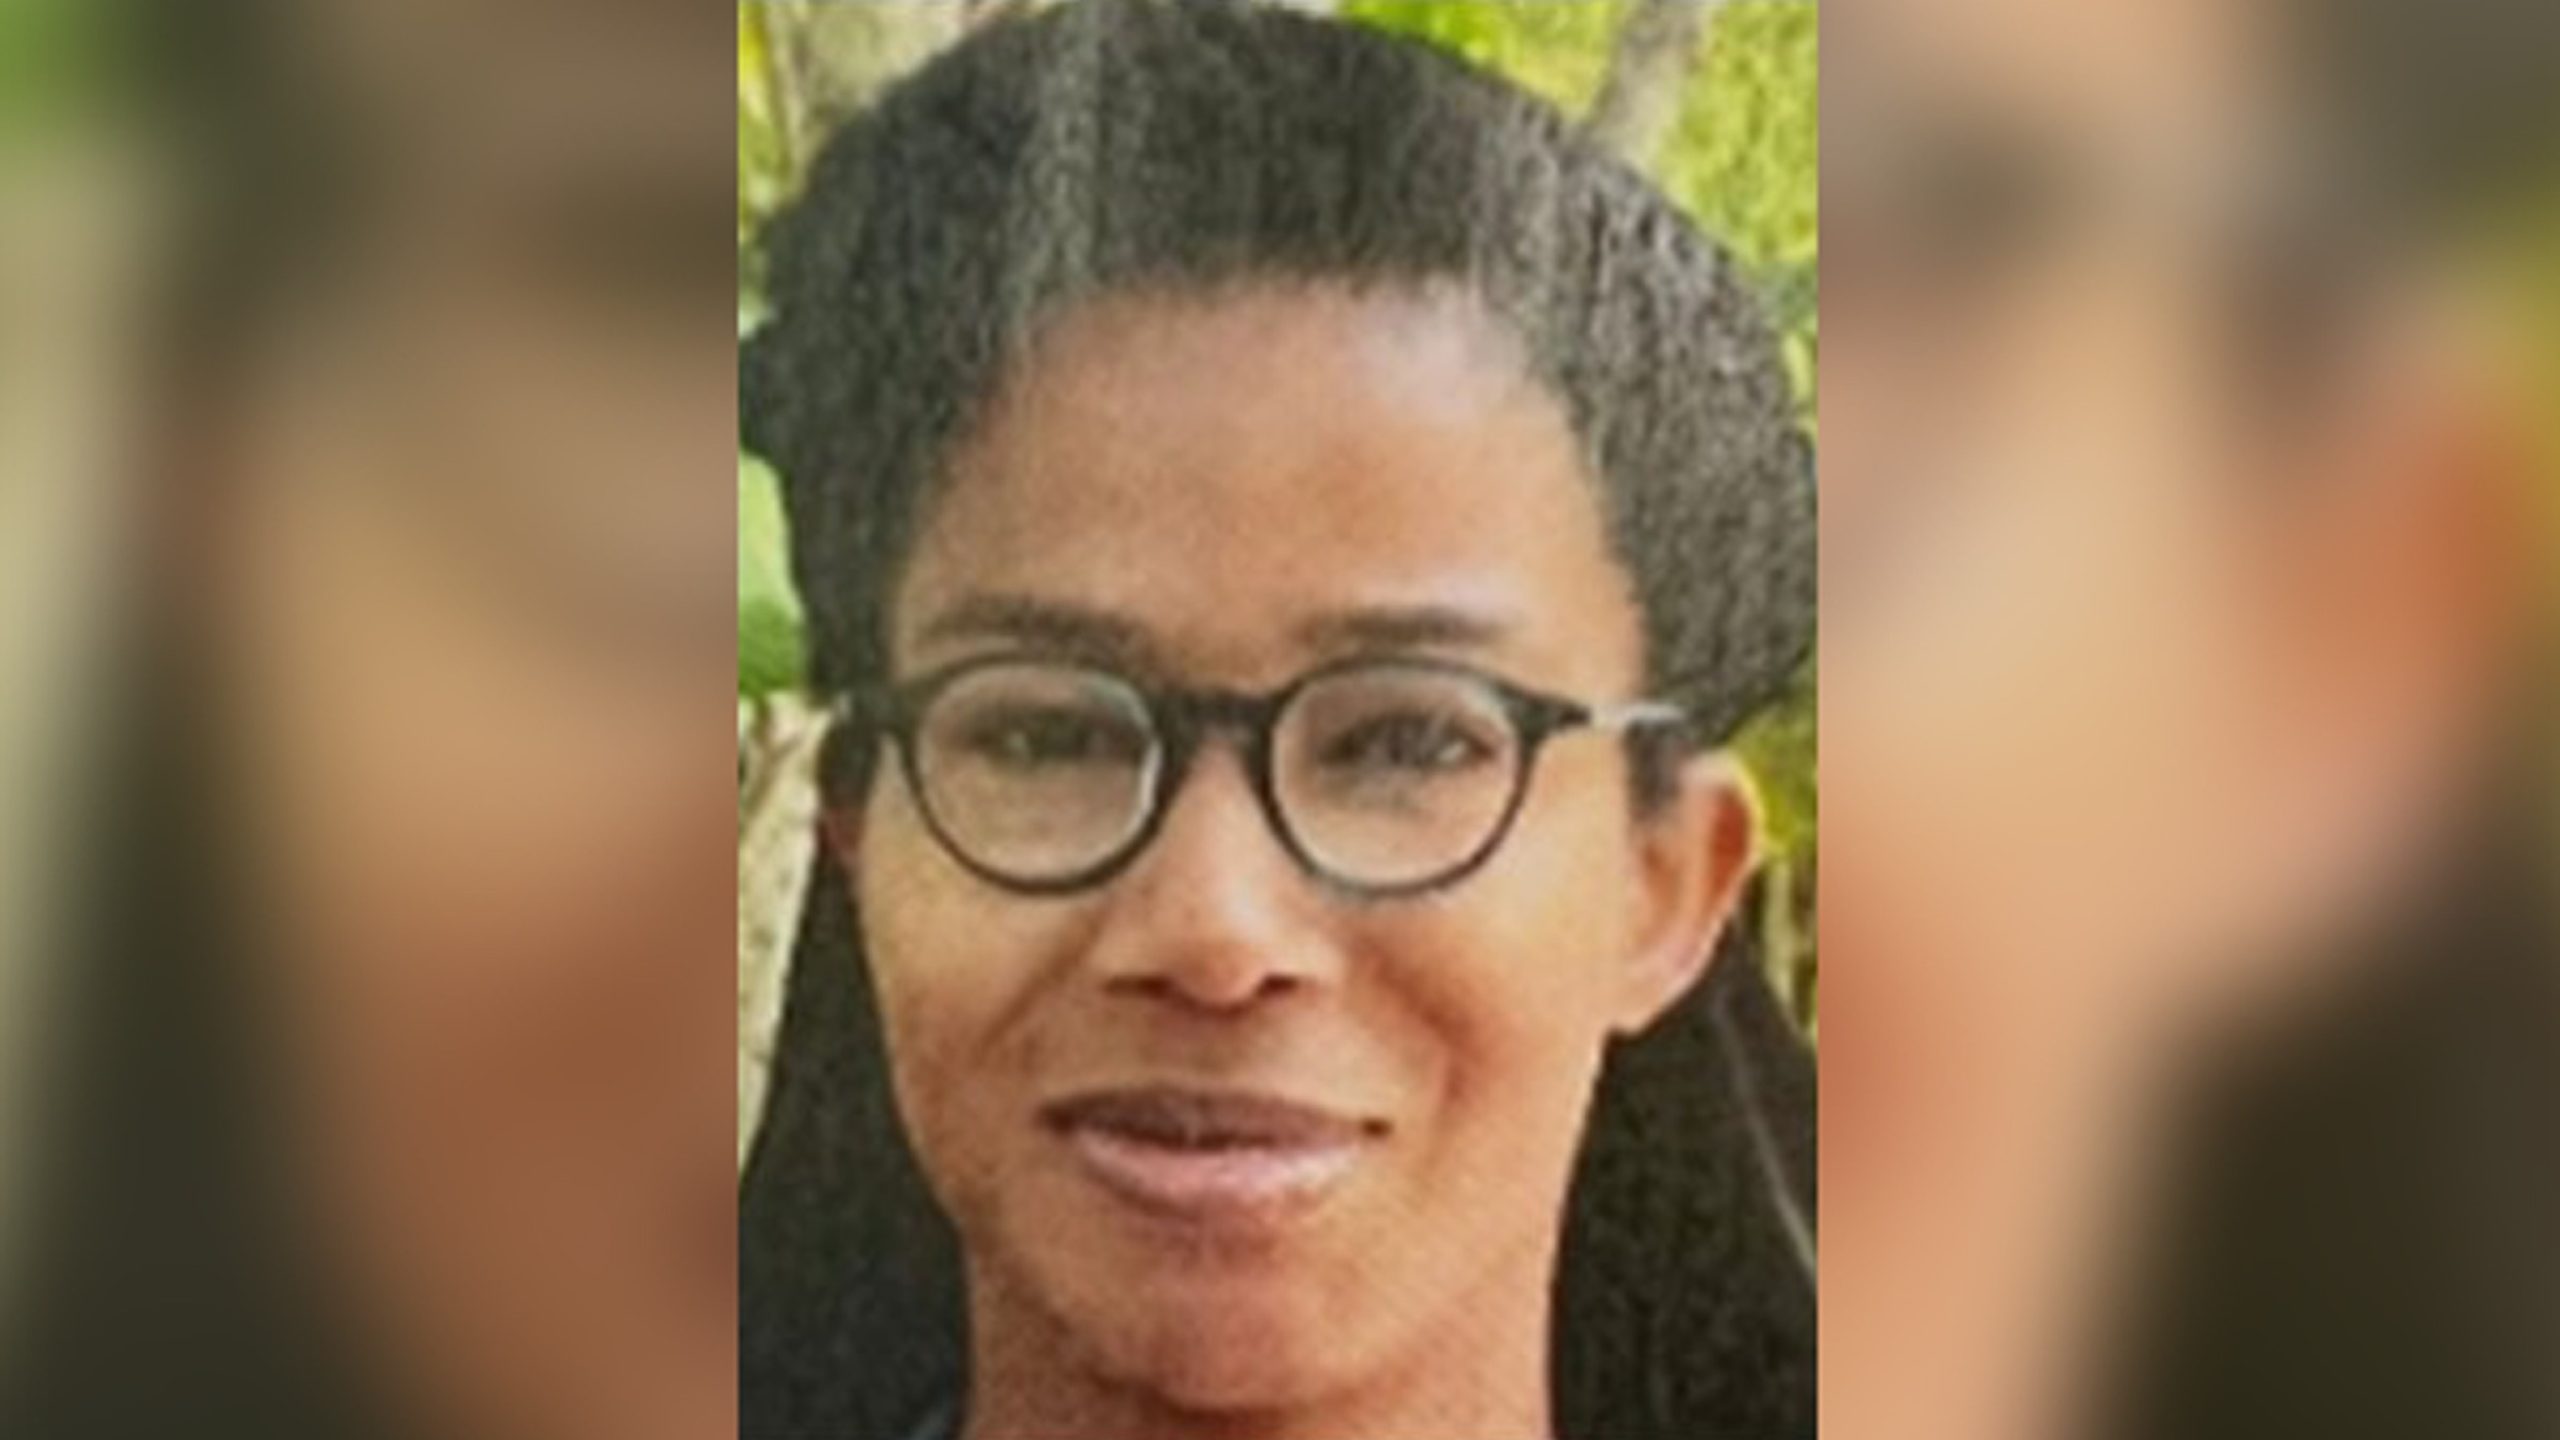 An American woman has gone missing during her attendance at a yoga retreat in the Bahamas